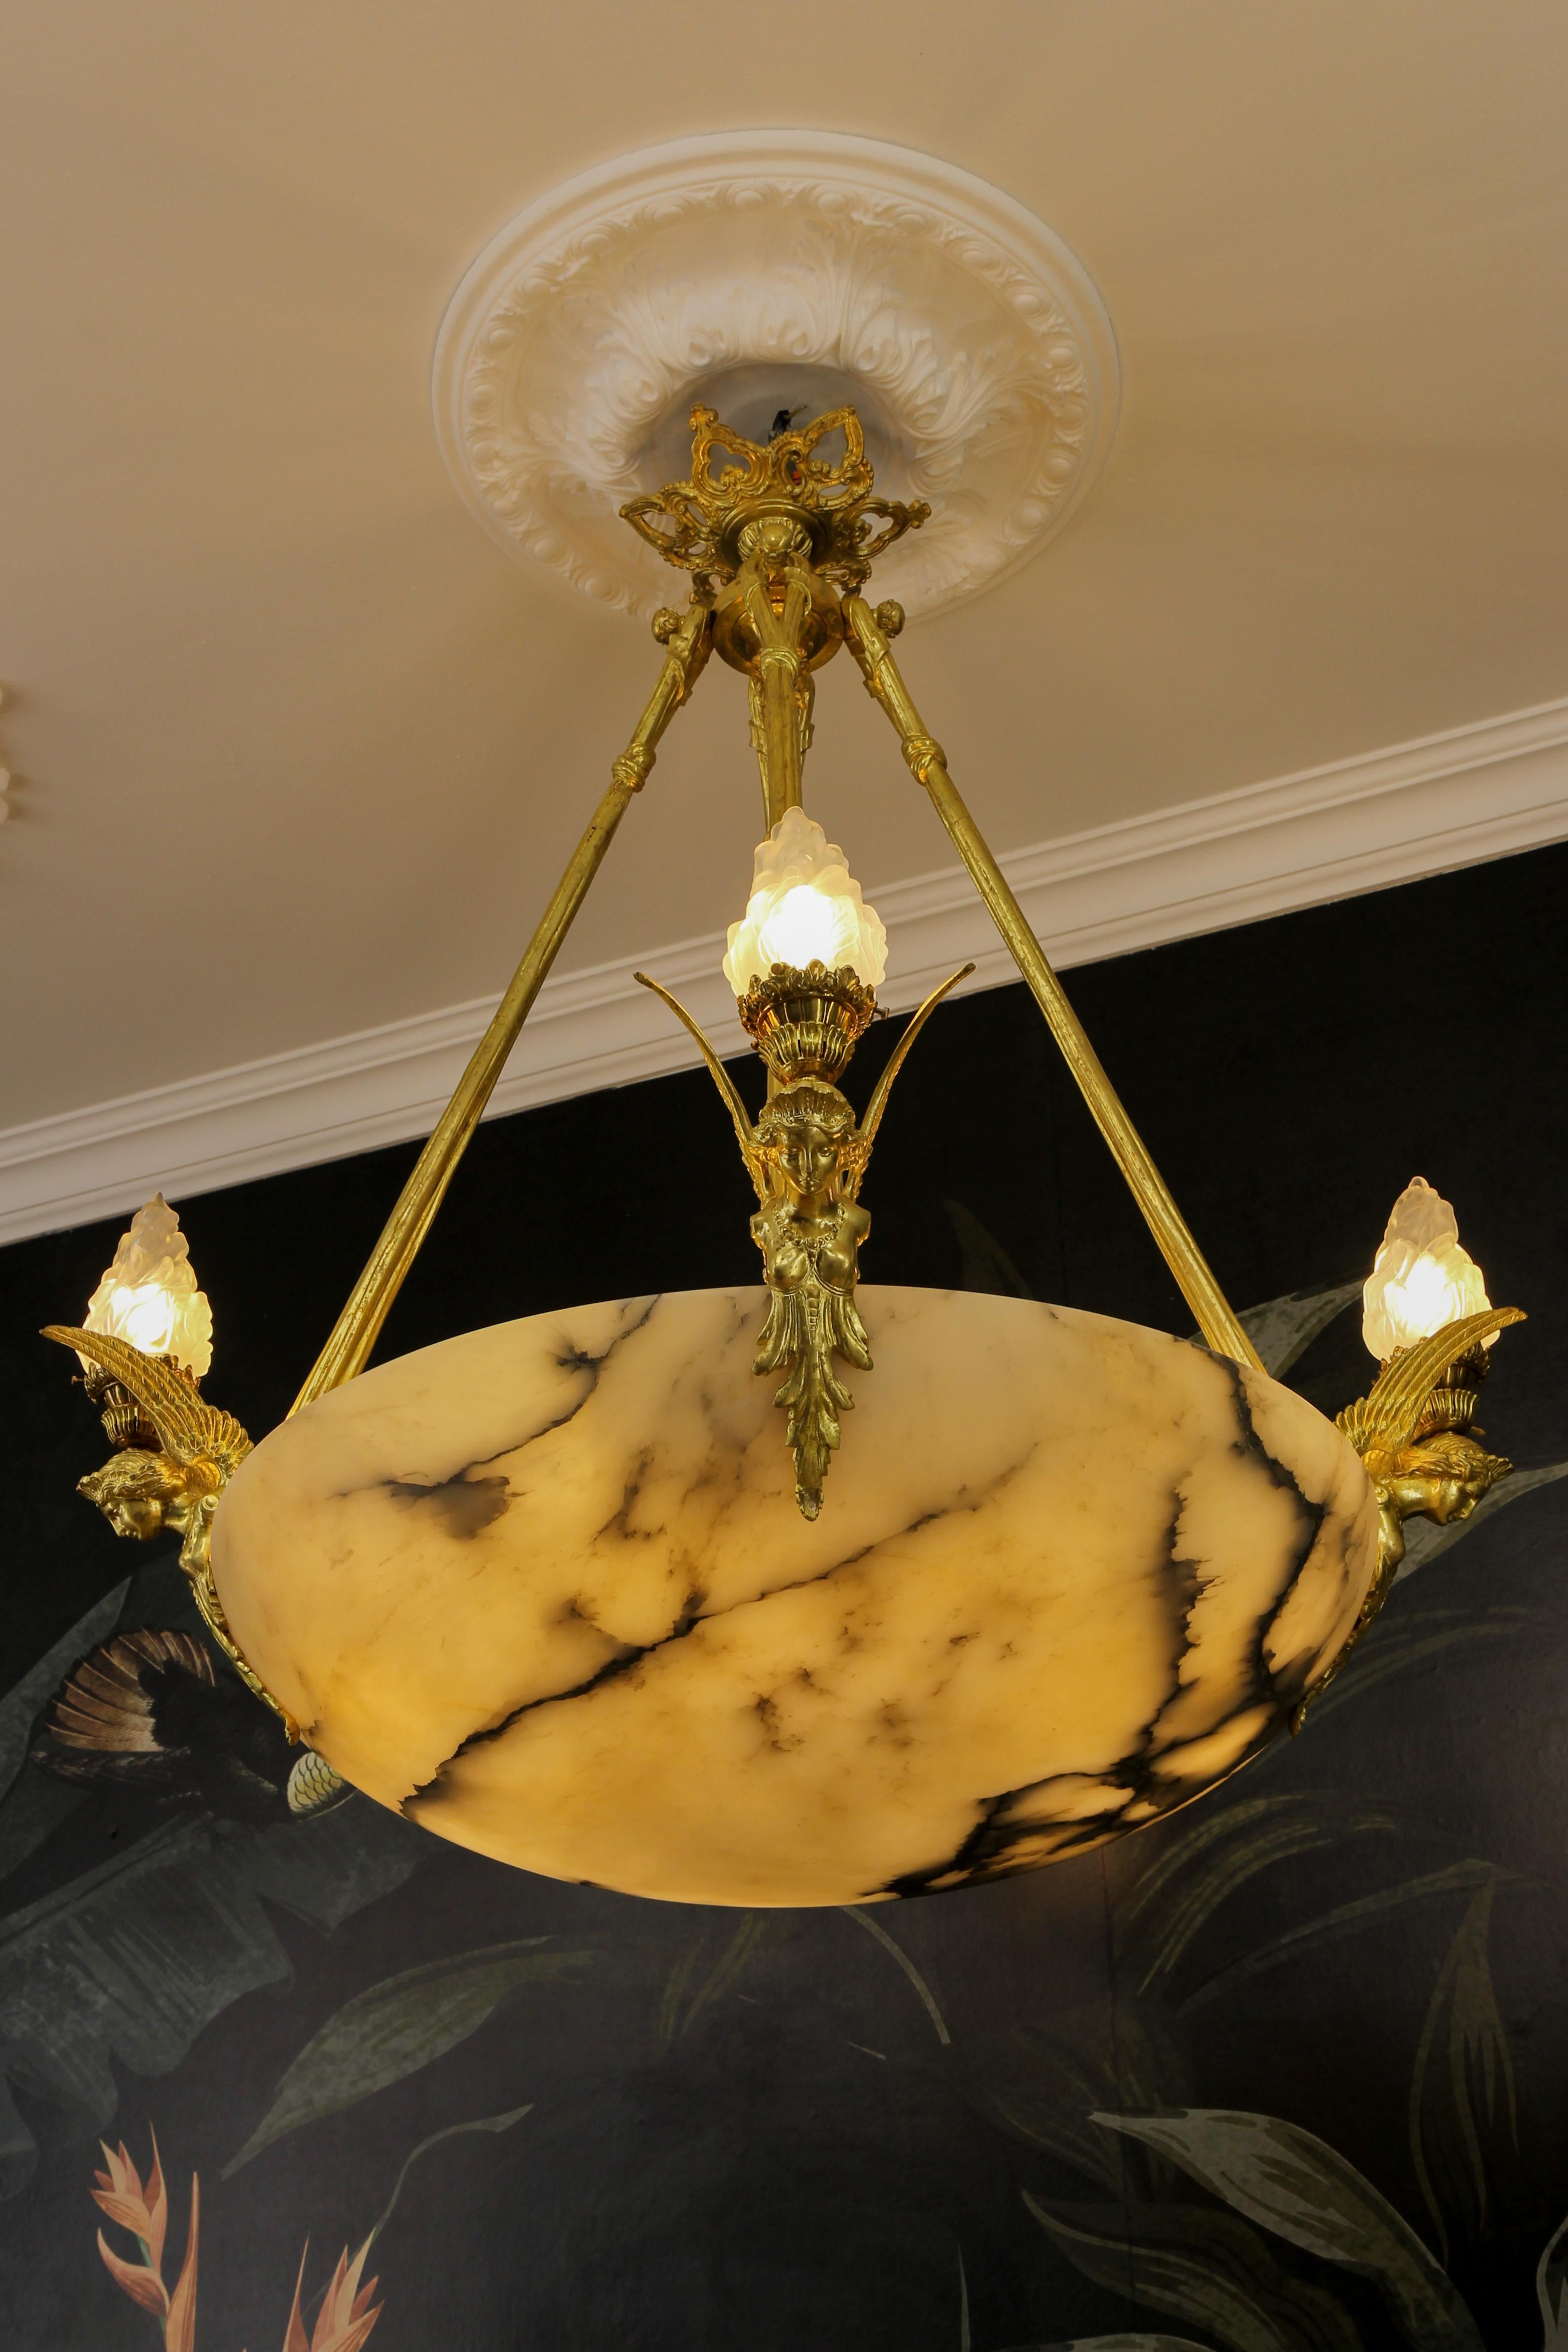 Large antique French Empire-style alabaster, frosted glass, and bronze pendant chandelier from circa 1890.
An impressive and large twelve-light alabaster pendant chandelier from the late 19th century. The beautifully veined large alabaster bowl with